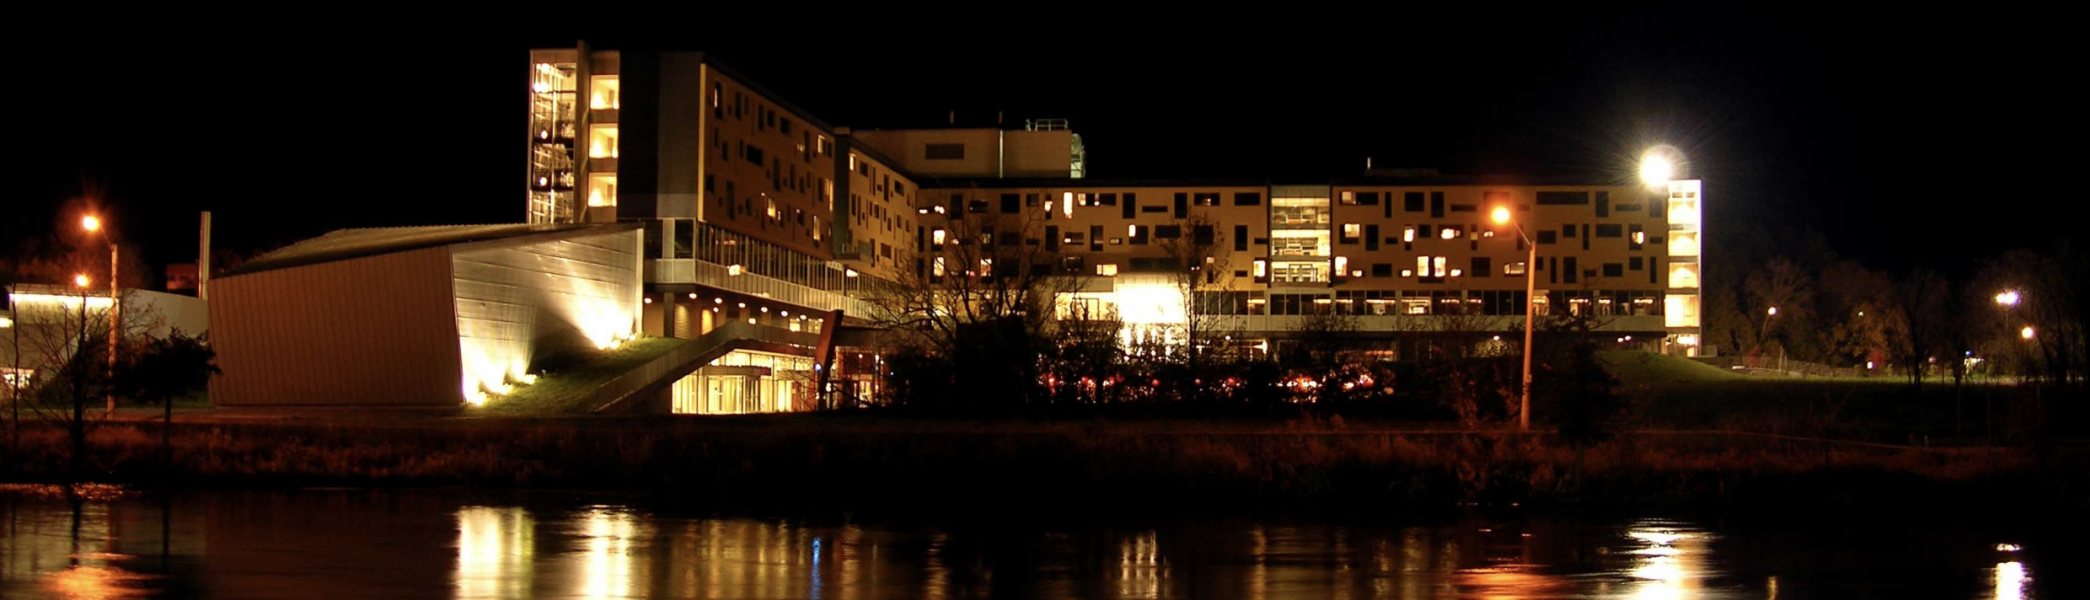 Gzowski College at night with lights reflecting off the Otonabee River